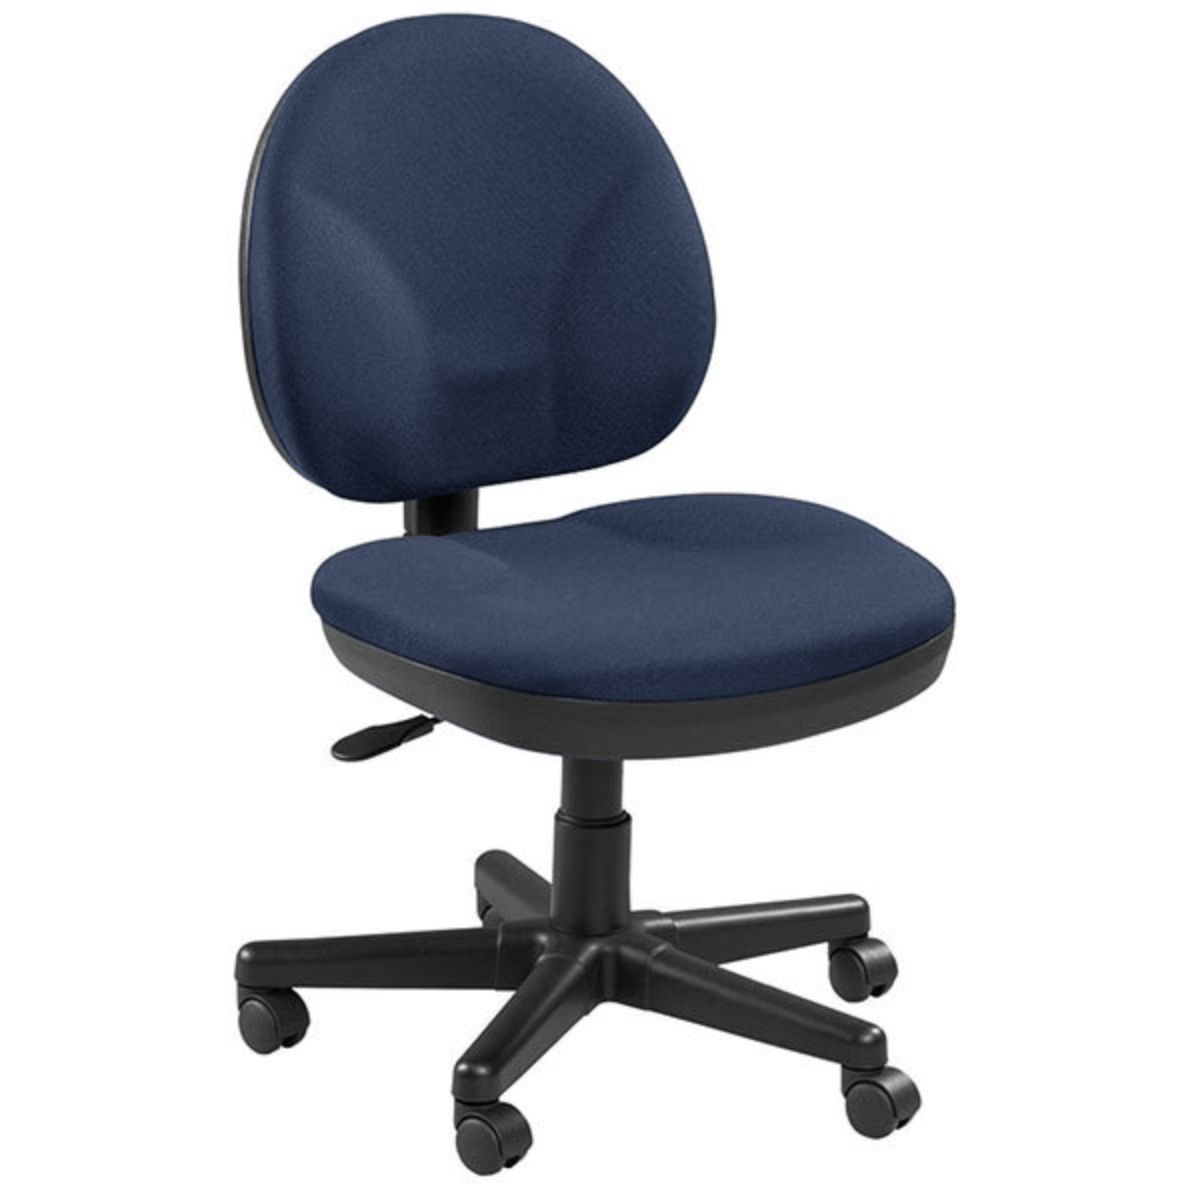 Blue and Black Adjustable Swivel Fabric Rolling Office Chair-372433-1